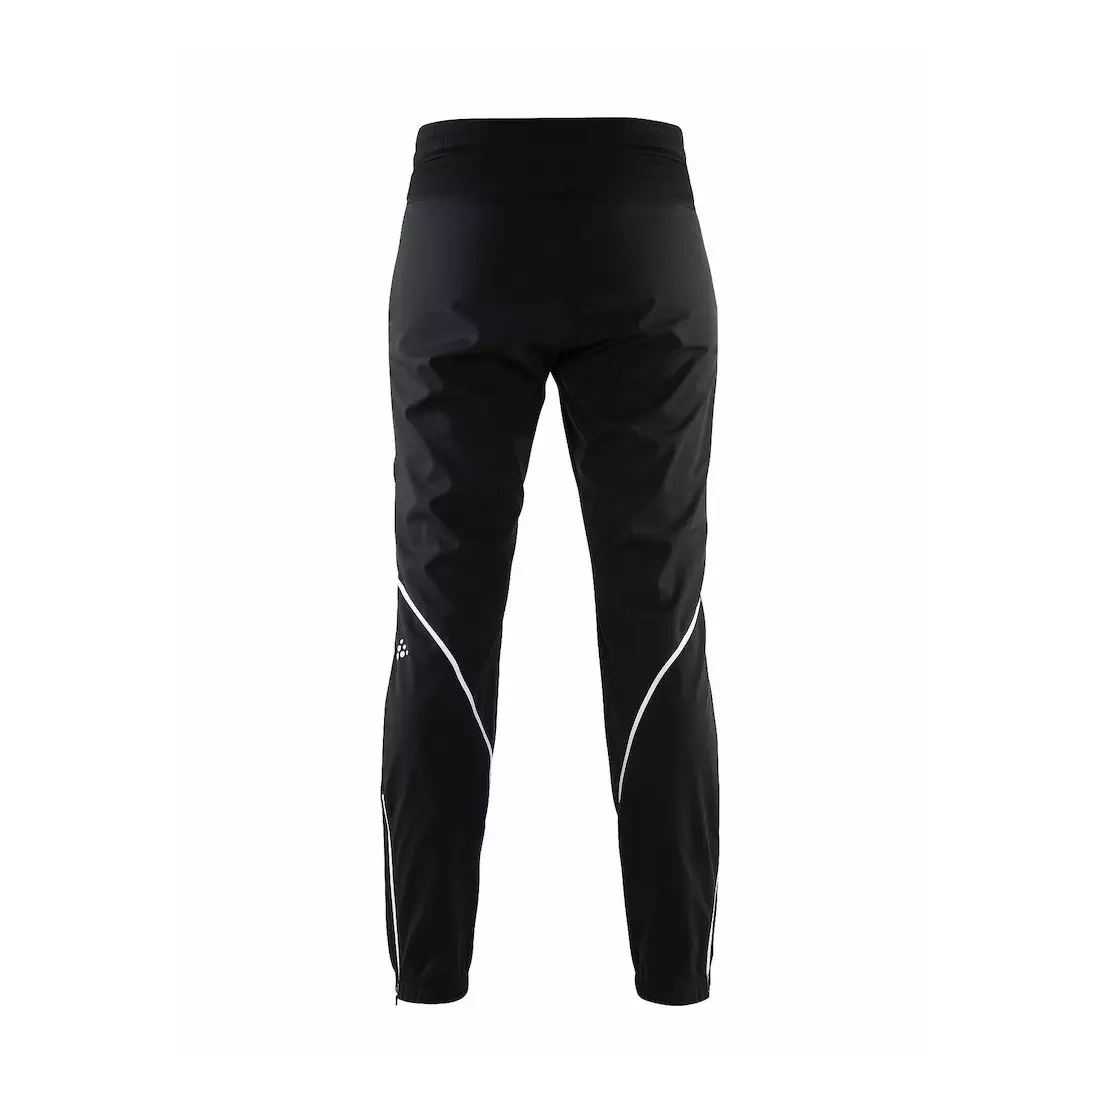 CRAFT XC Force Pant women's insulated sports pants 1905249-999900